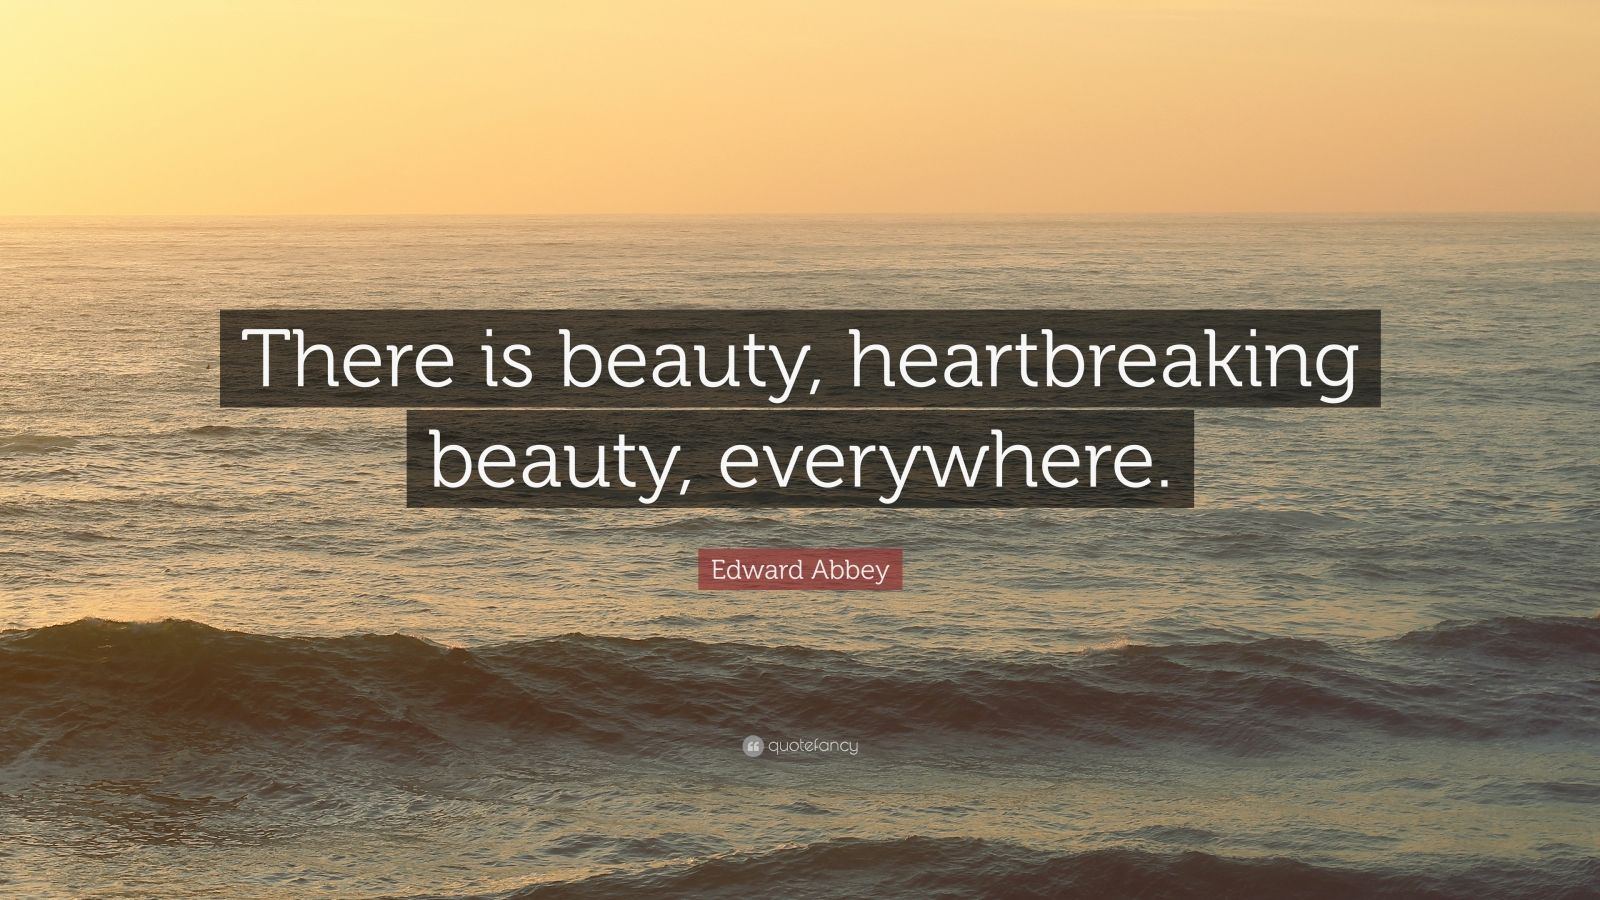 Edward Abbey Quote: "There is beauty, heartbreaking beauty, everywhere." (7 wallpapers) - Quotefancy